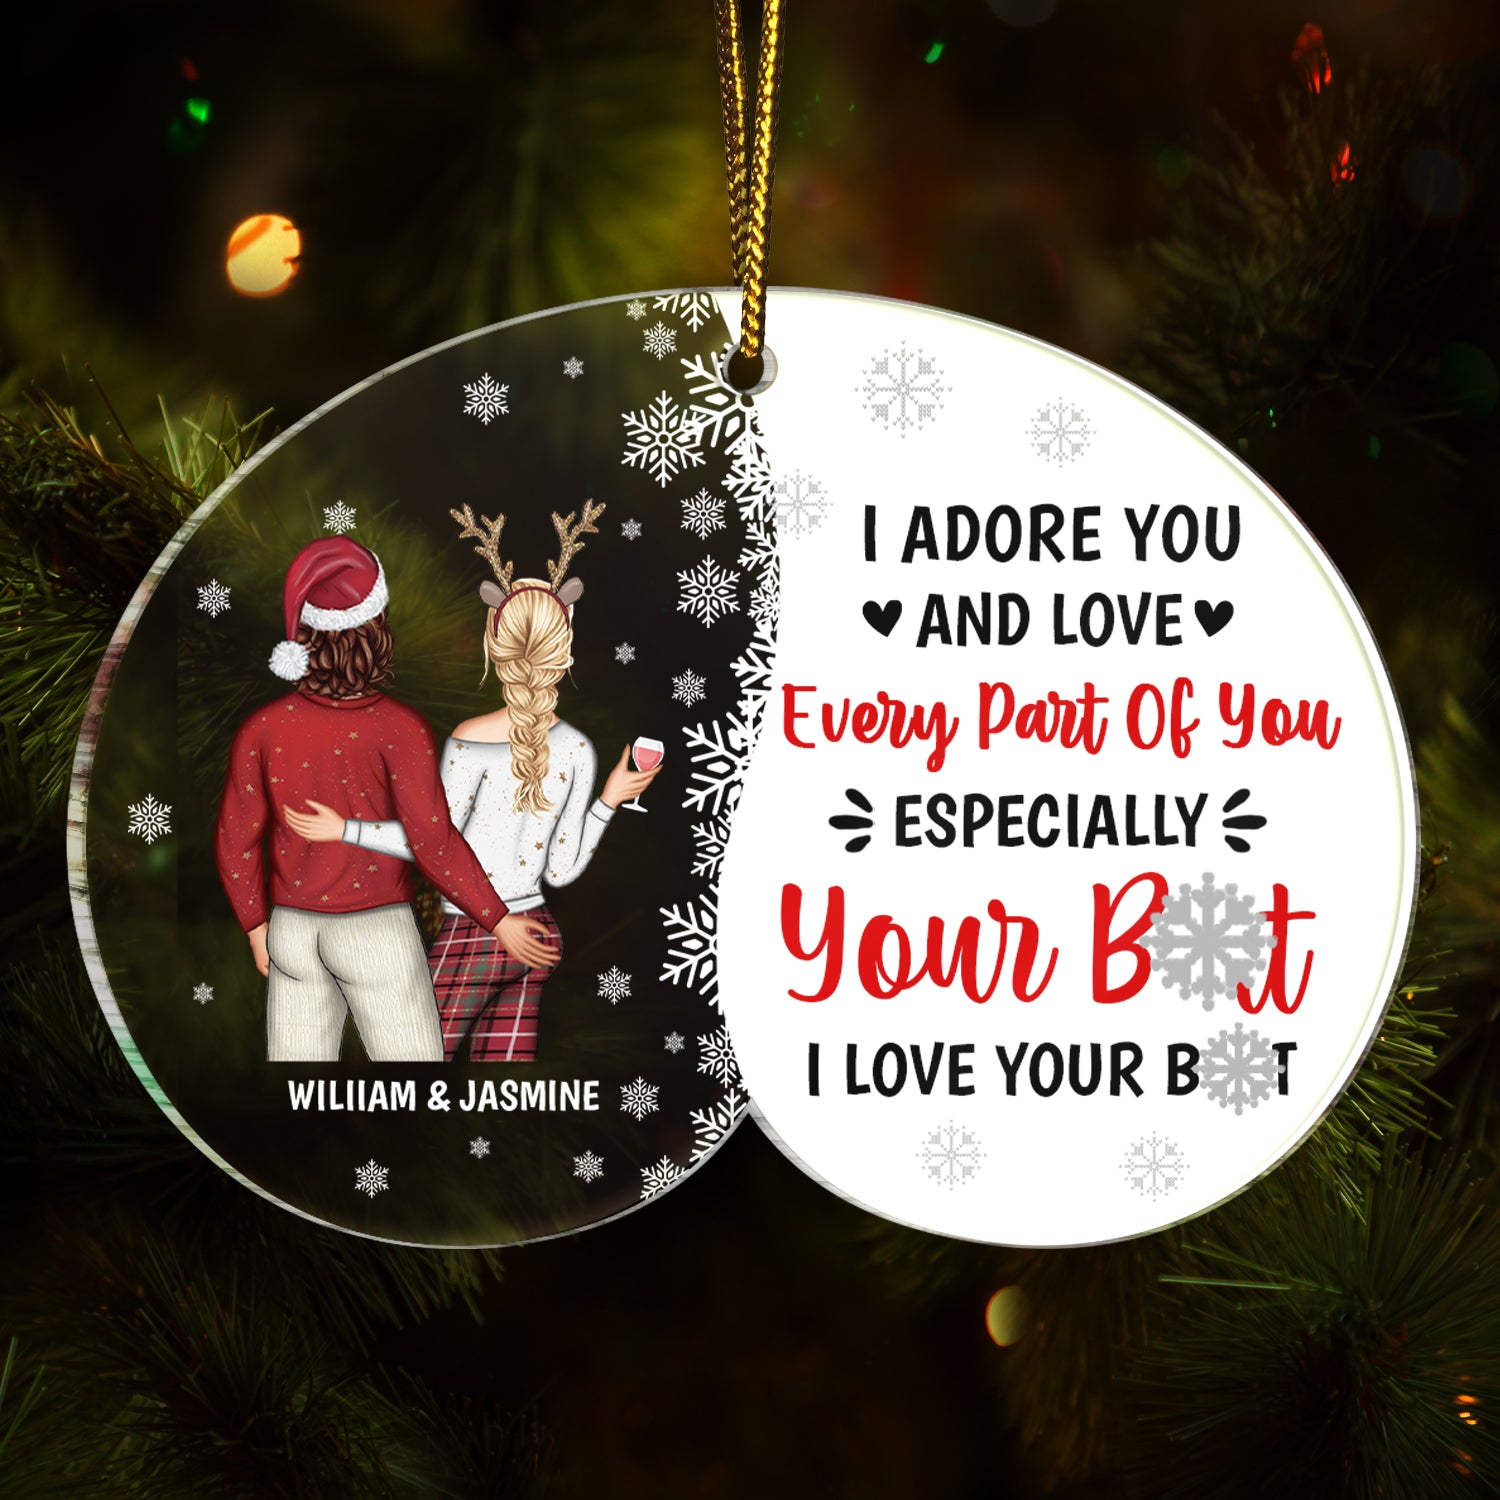 Every Part Of You - Christmas Gift For Couples - Personalized Custom Shaped Acrylic Ornament